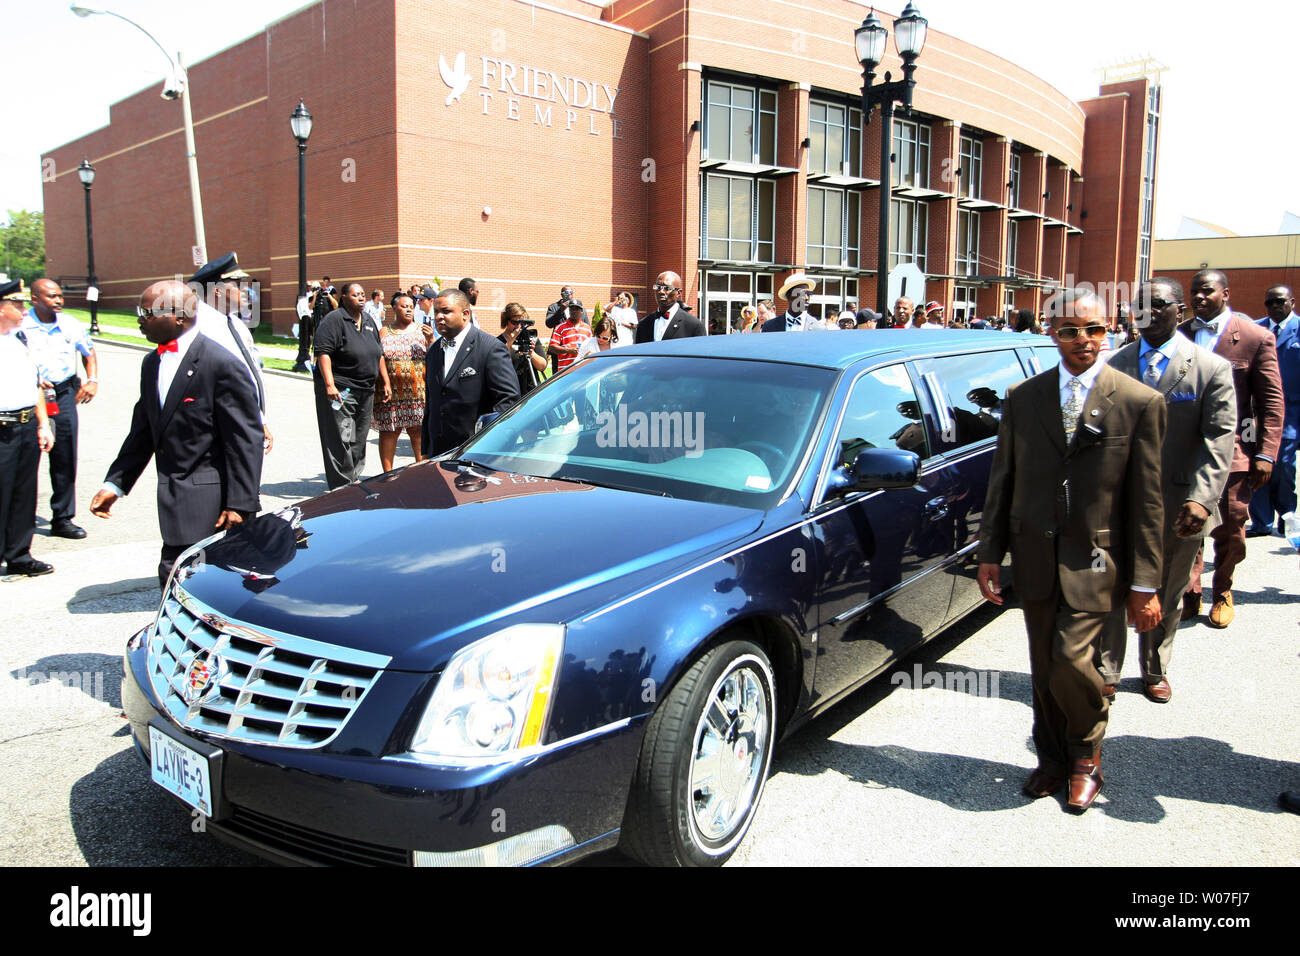 The family of Michael Brown Jr. leaves his funeral service at the Friendly Temple Missionary Baptist Church in St. Louis on August 25, 2014. Brown gained attention after being shot by a white Ferguson, Missouri police officer on August 9 and was unarmed. The shooting led to several nights of looting, arrests and heavy police presence.   UPI/Bill Greenblatt Stock Photo